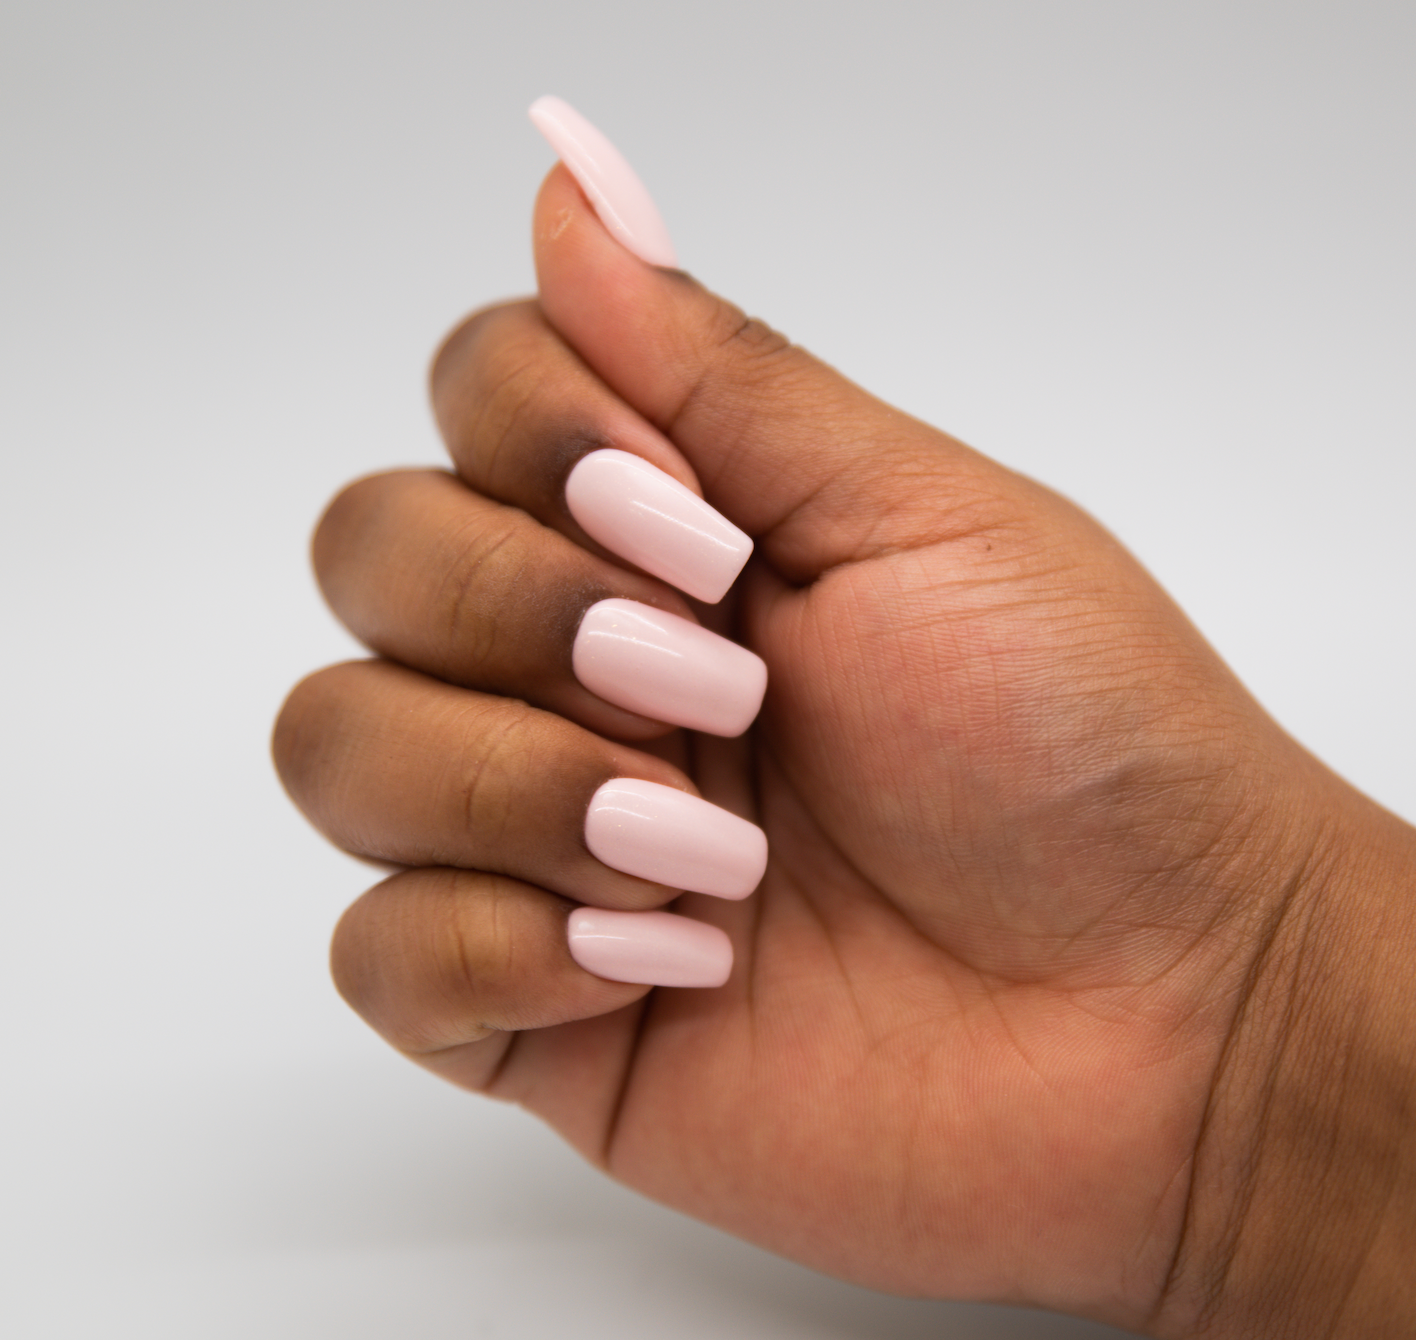 Lip Gloss Manicures: The Latest Neutral Nail Art Trend